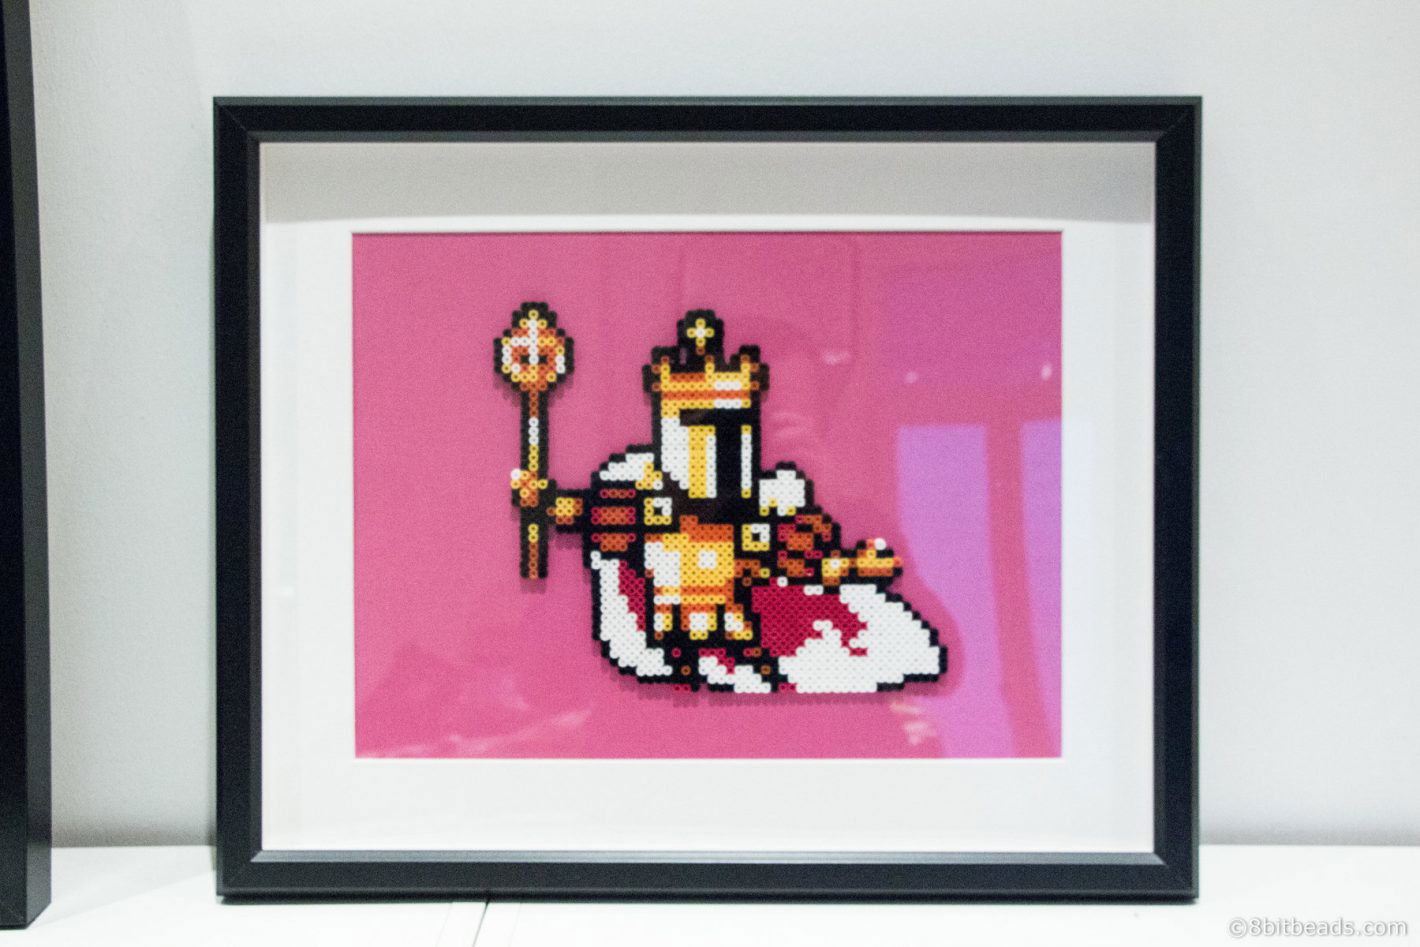 King Knight from Shovel Knigt - 8bitbeads.com